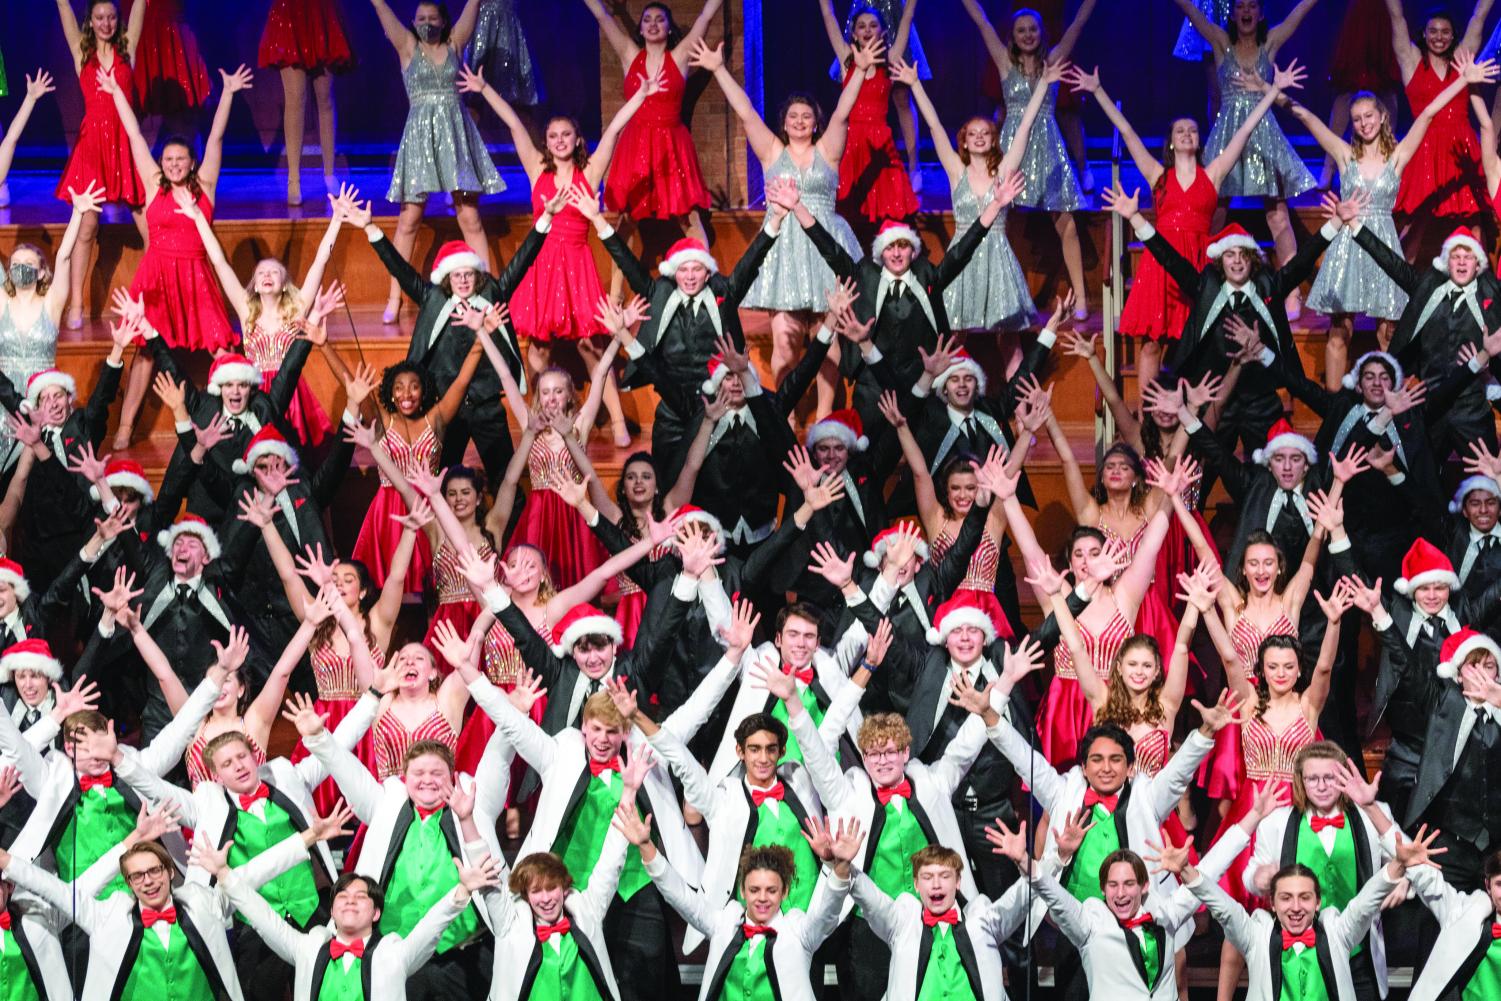 Carmel High School Choirs perform in their annual Holiday Spectacular show on Dec. 10, 2021. The show was held at St. Luke’s Methodist Church this year due to the Dale E. Graham auditorium undergoing renovations.